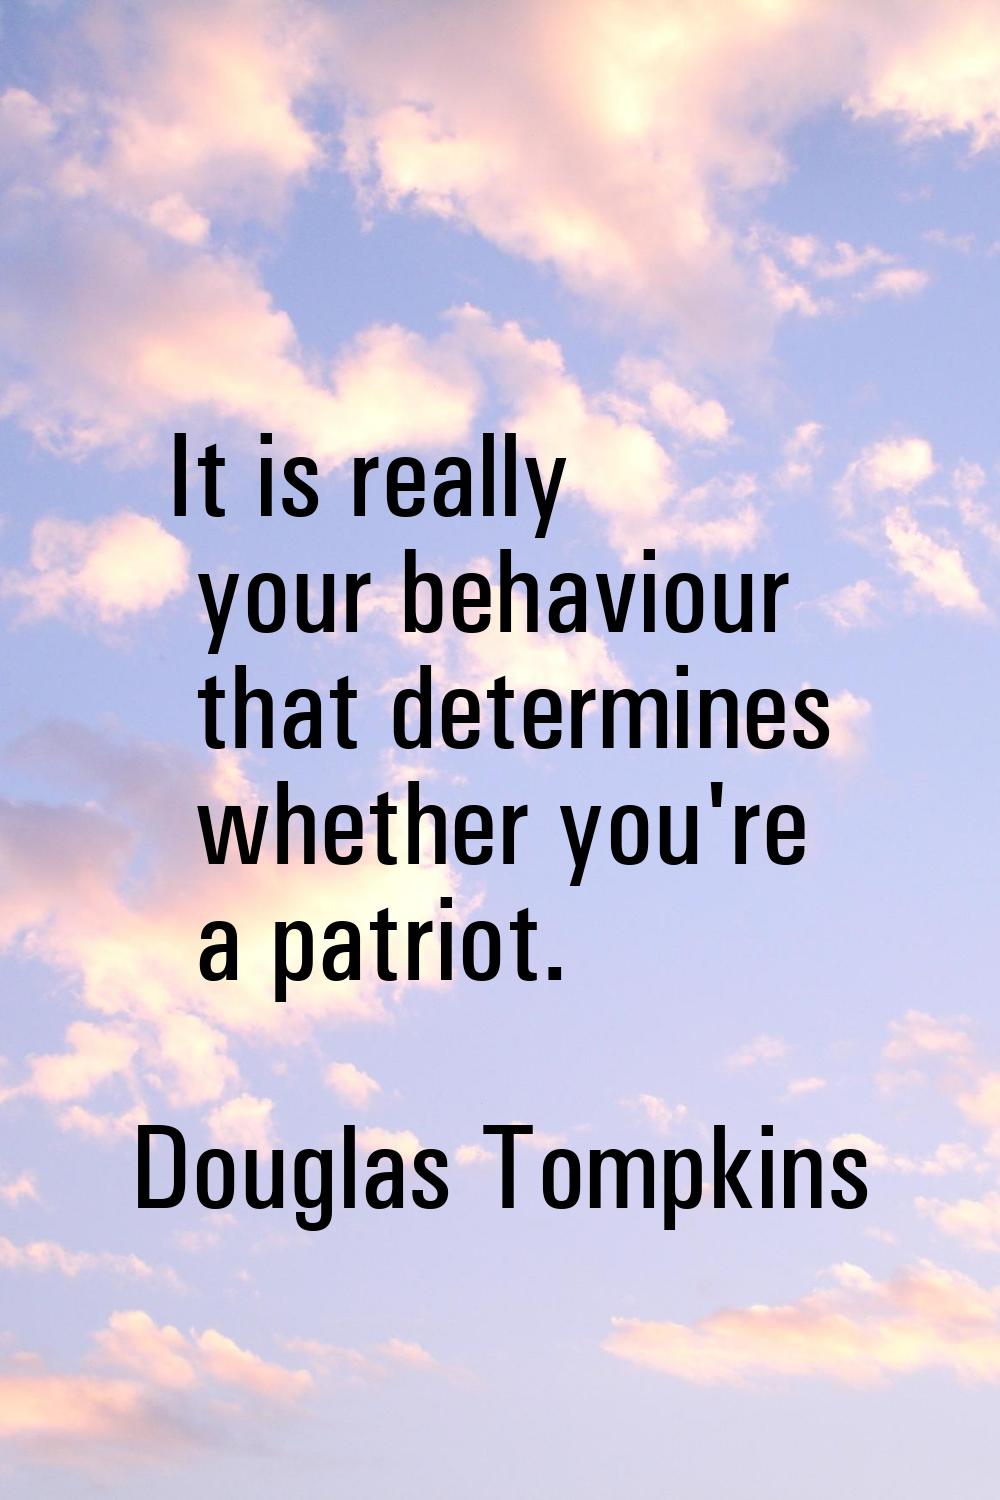 It is really your behaviour that determines whether you're a patriot.